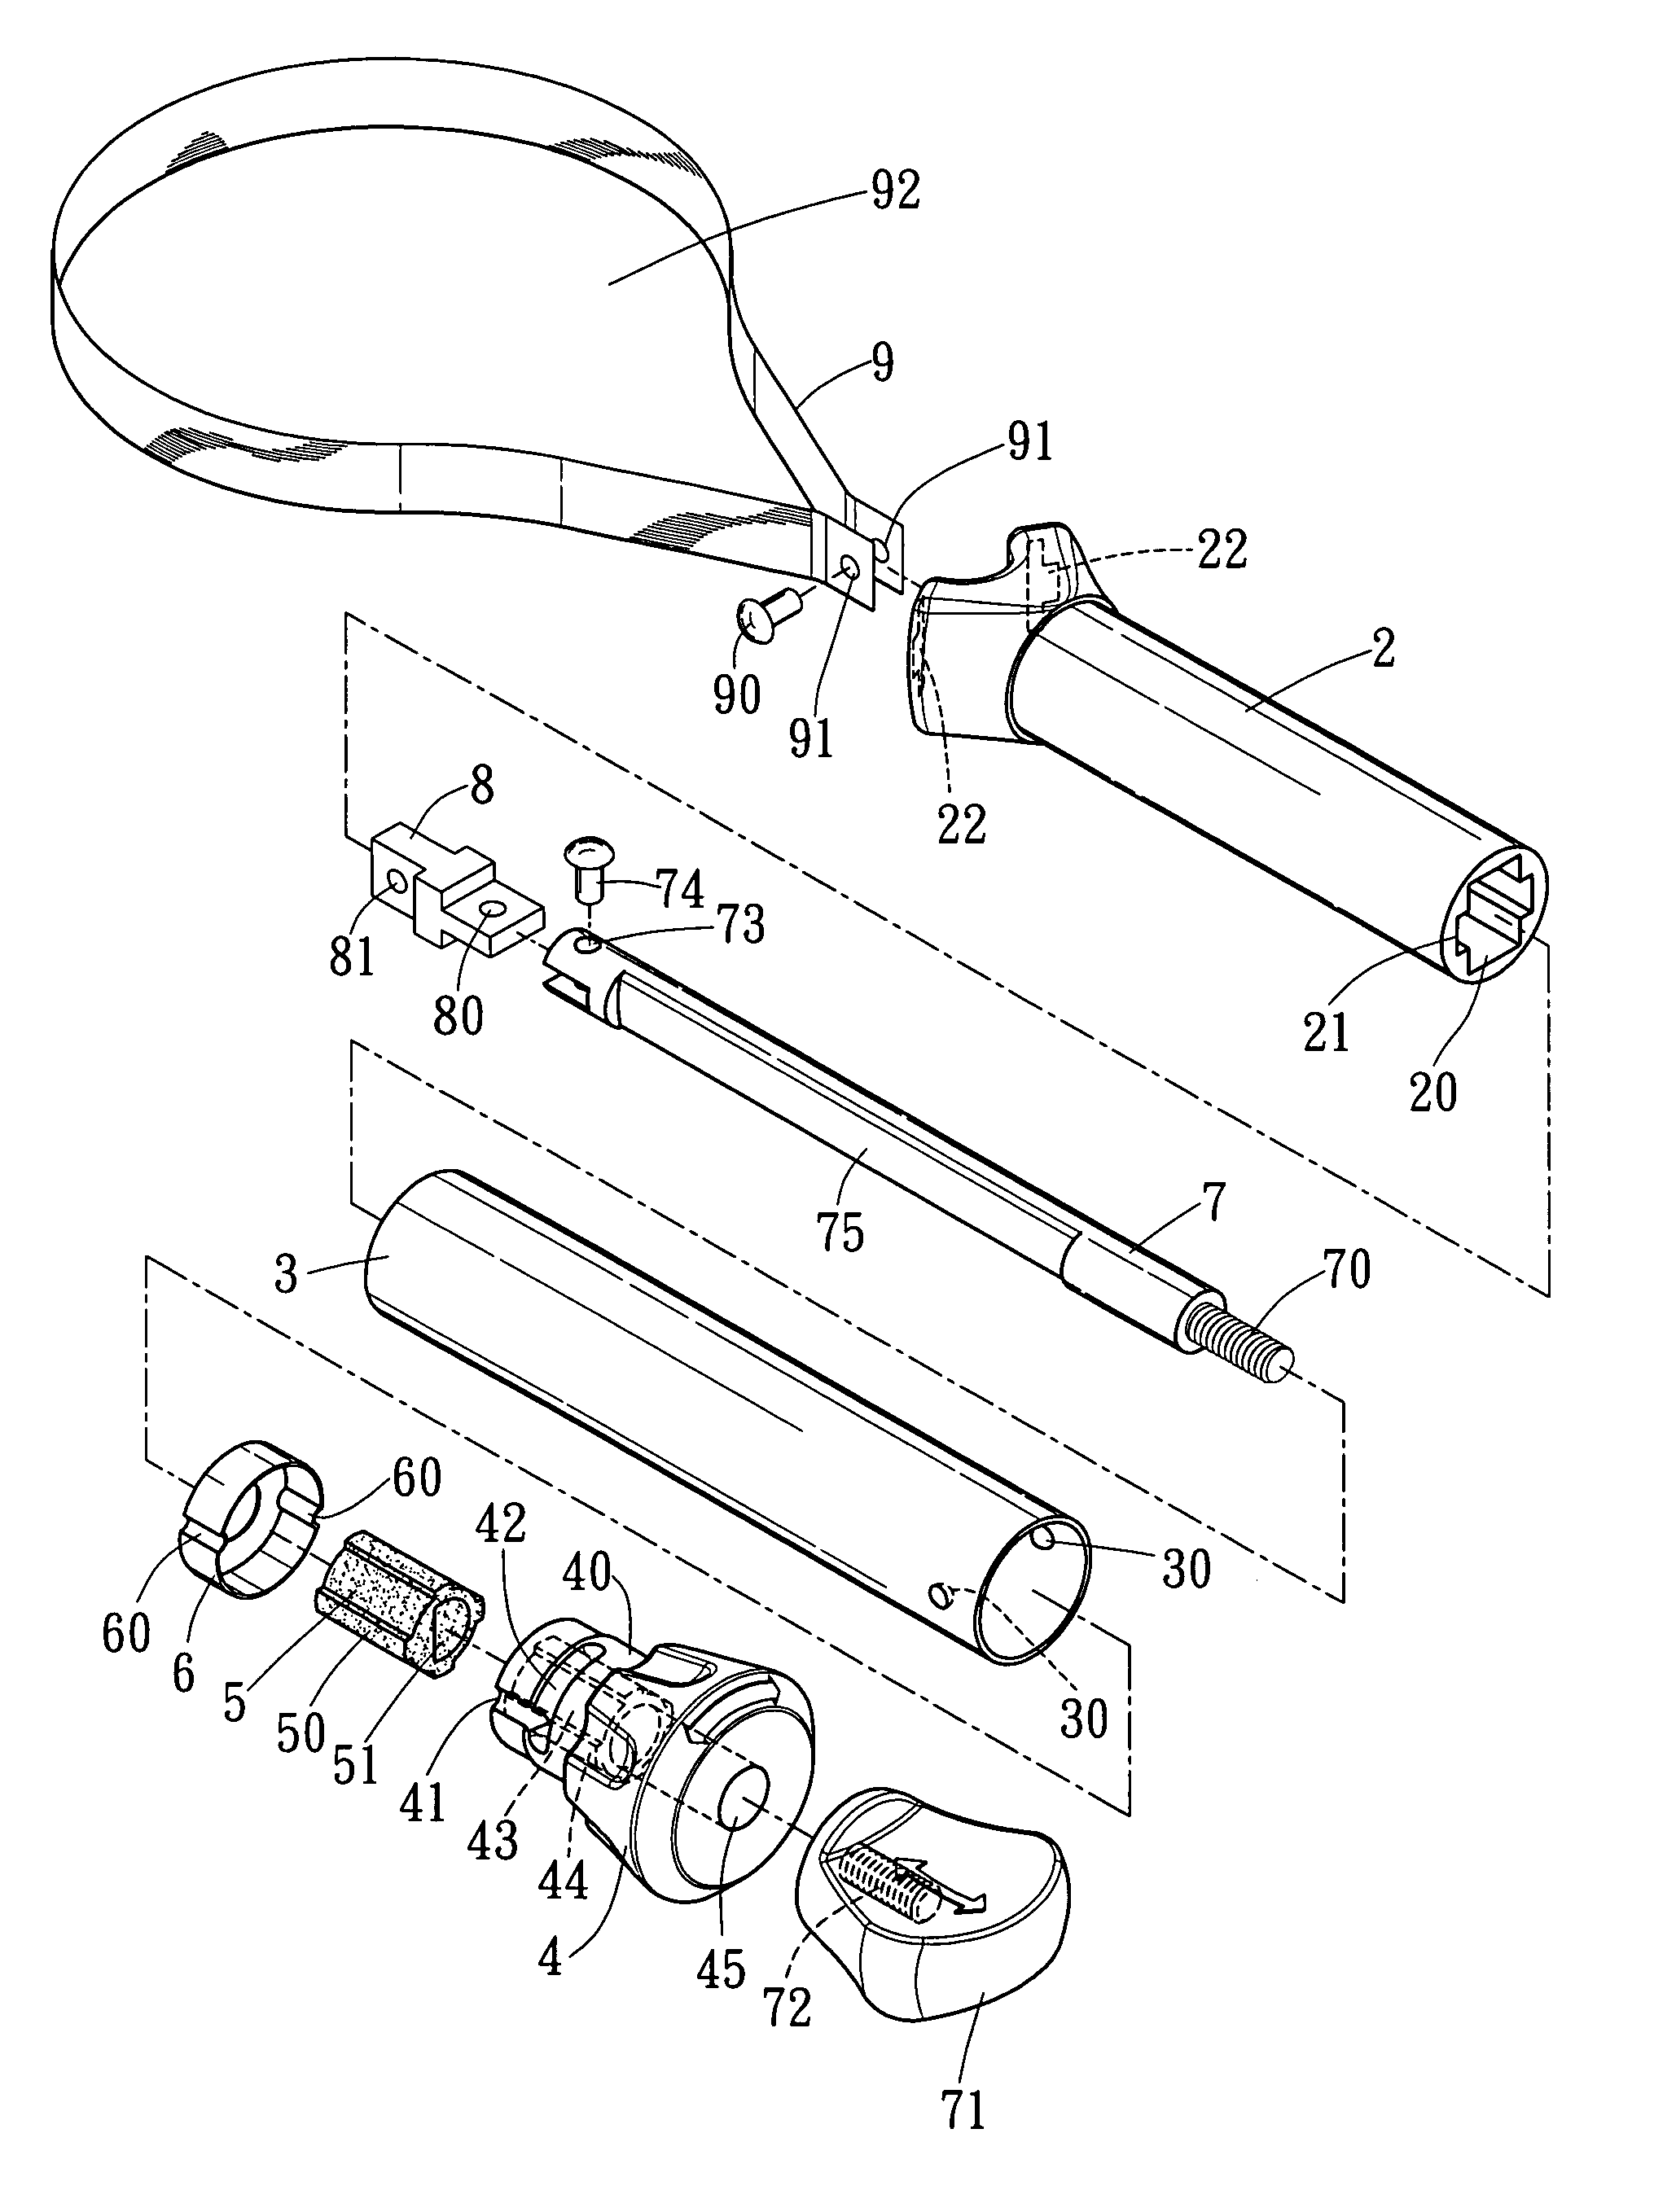 Fruit and vegetable seed removing device